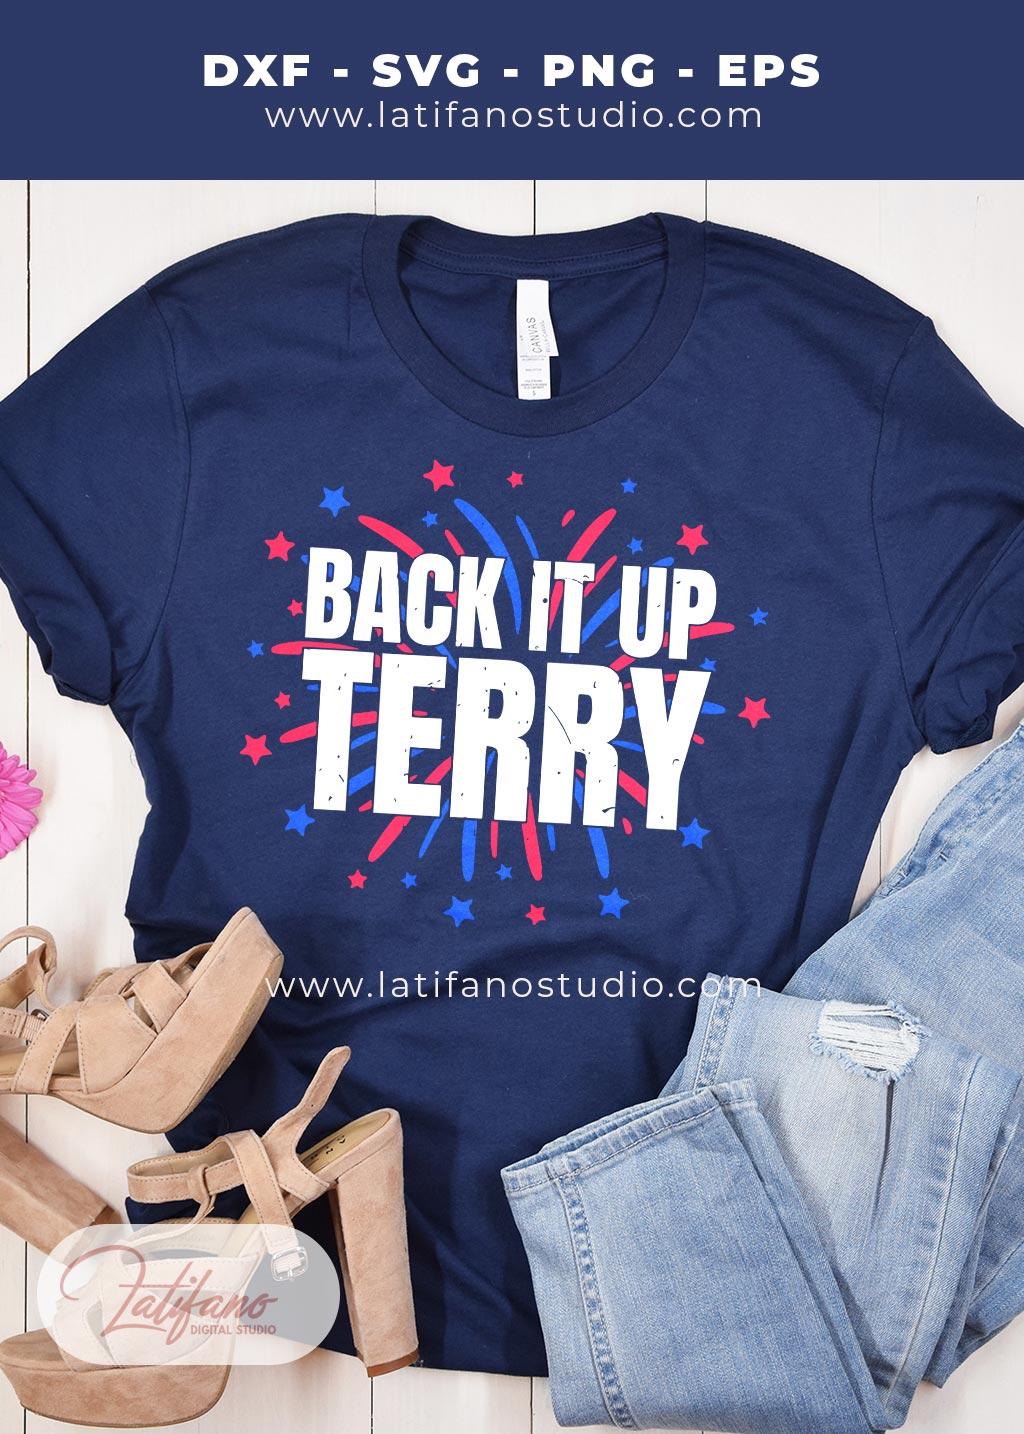 Back it up terry SVG for tshirt design